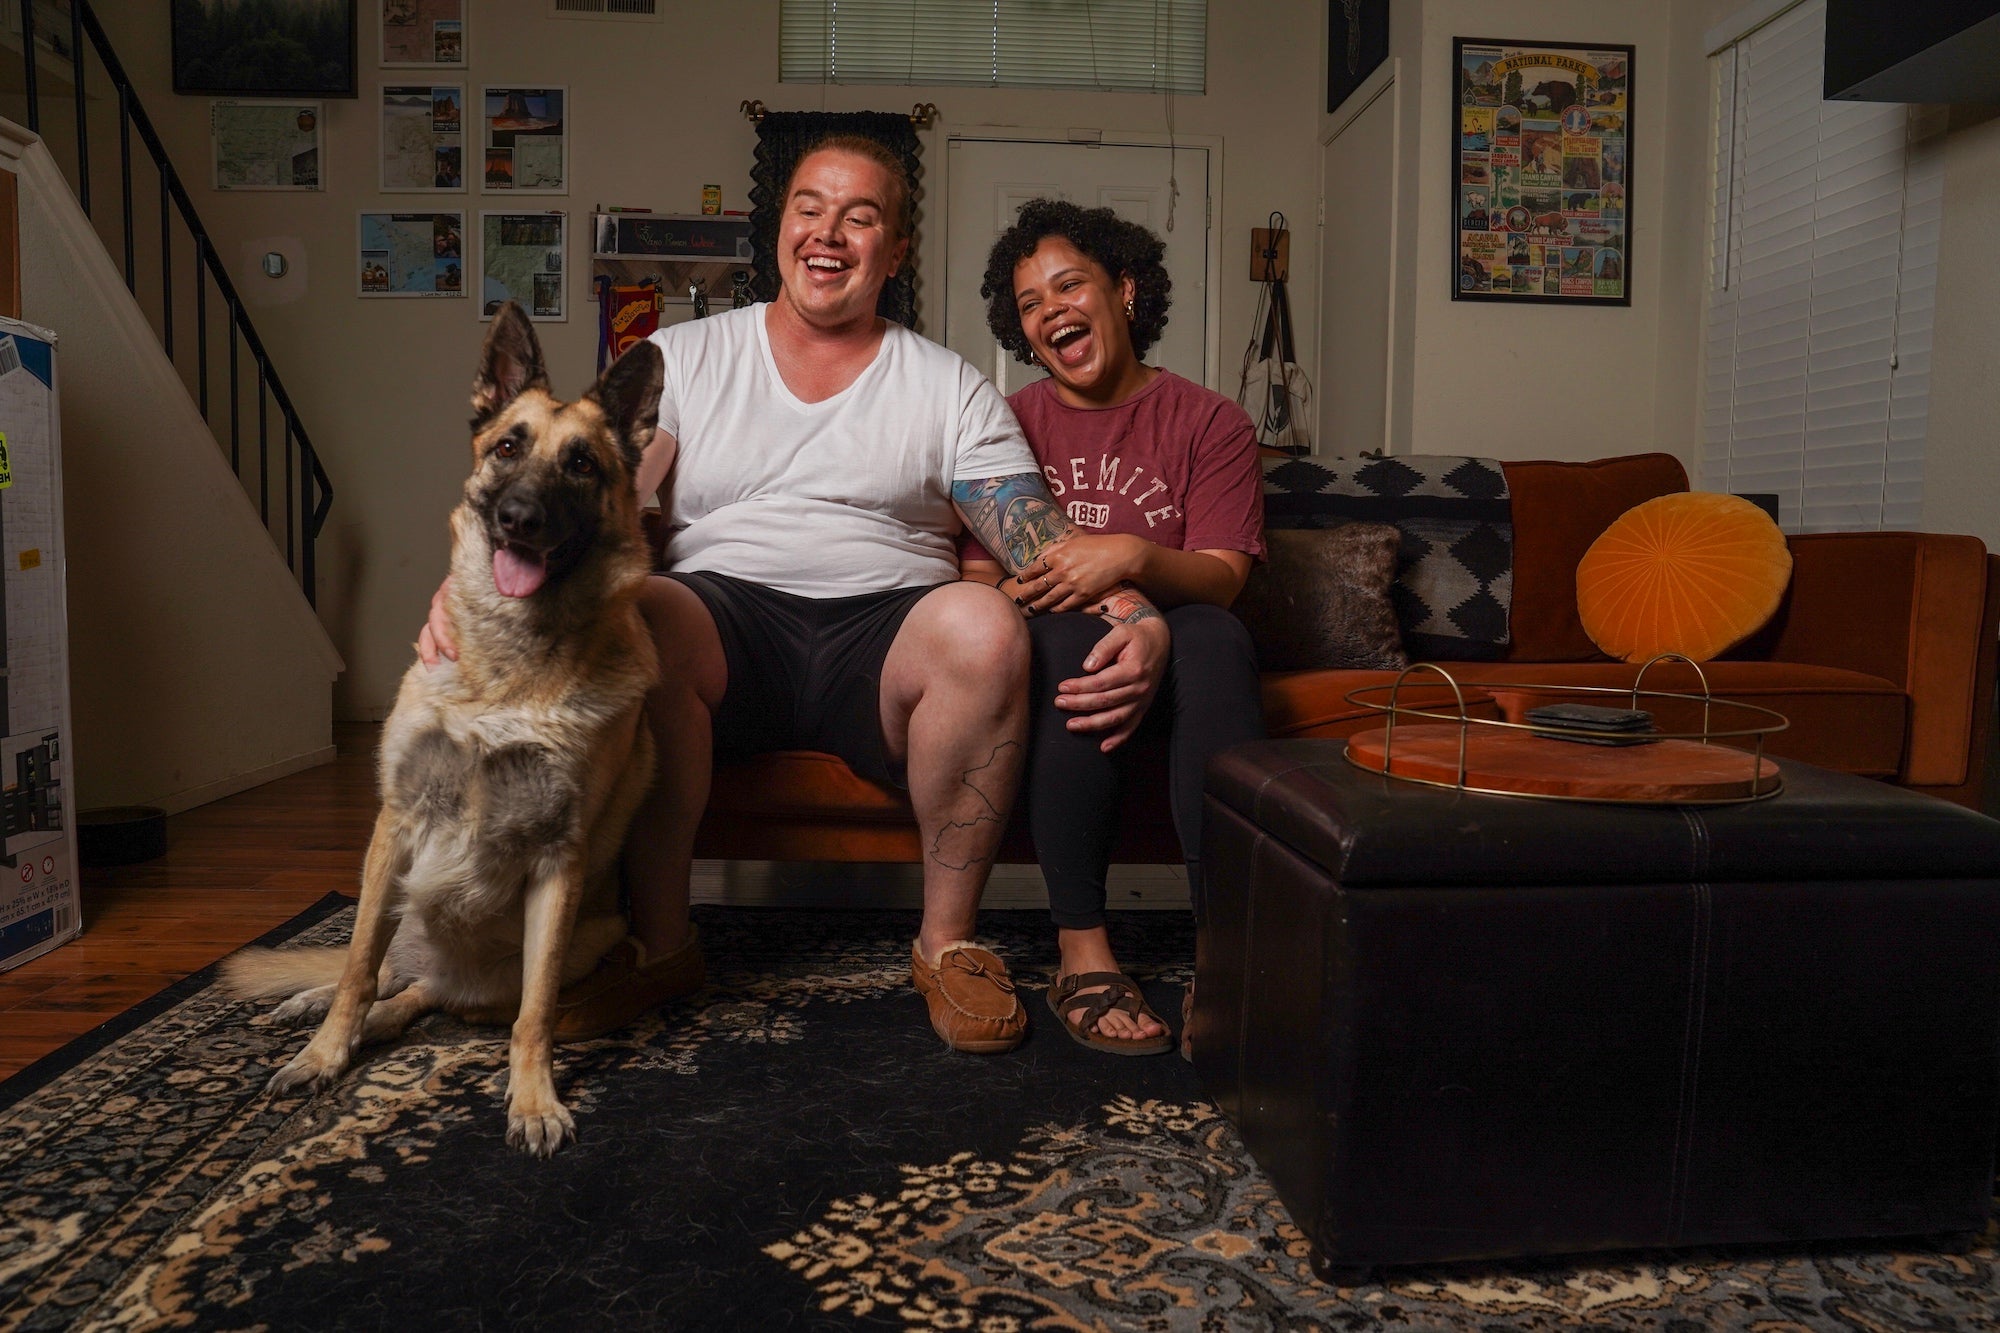 Matthew Treviño, Emily Fletcher and their dog Rosie, a german shepherd mix, sit on a couch at their home in Sacramento. Matthew is part of a UC Davis Health clinical trial for a hormonal birth control gel for men.